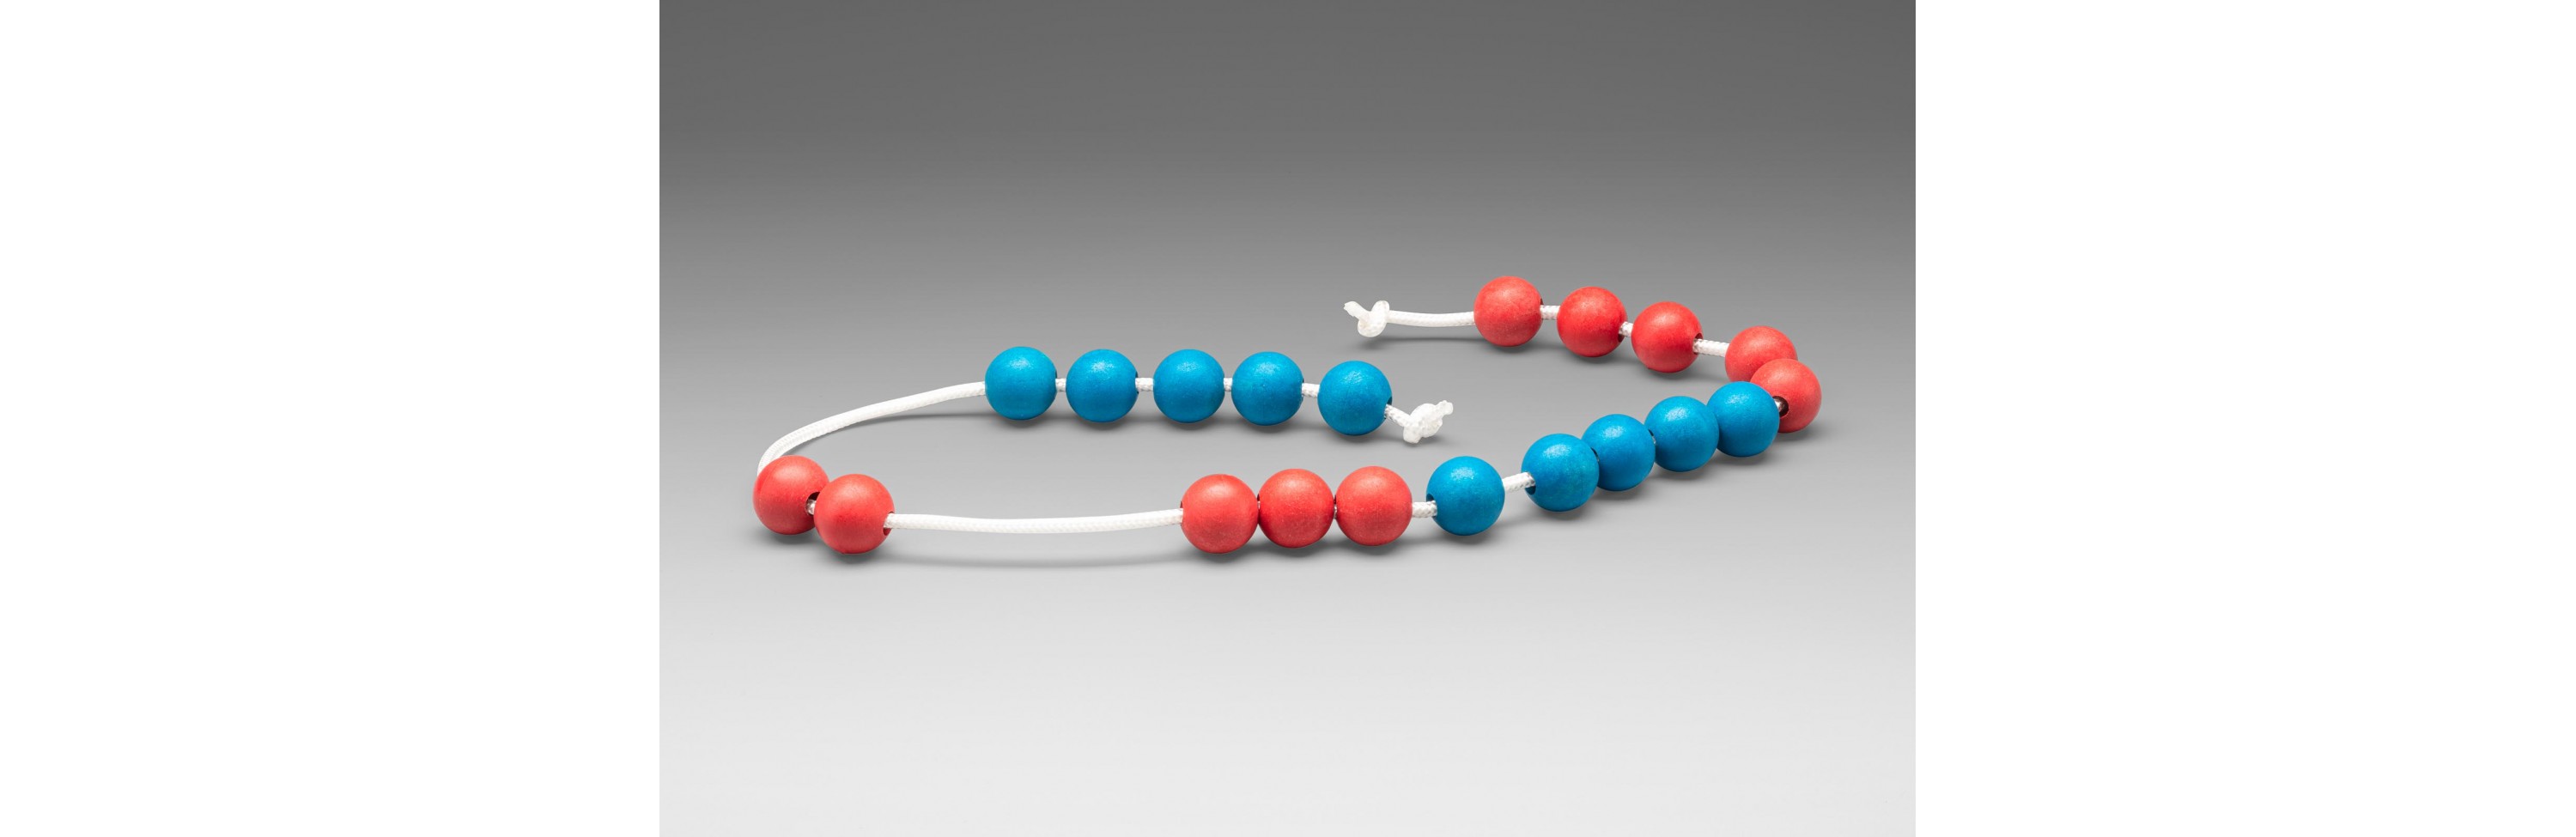 Wissner® active learning - Jumbo Arithmetic Bead String red/blue with 20 balls RE-Wood®